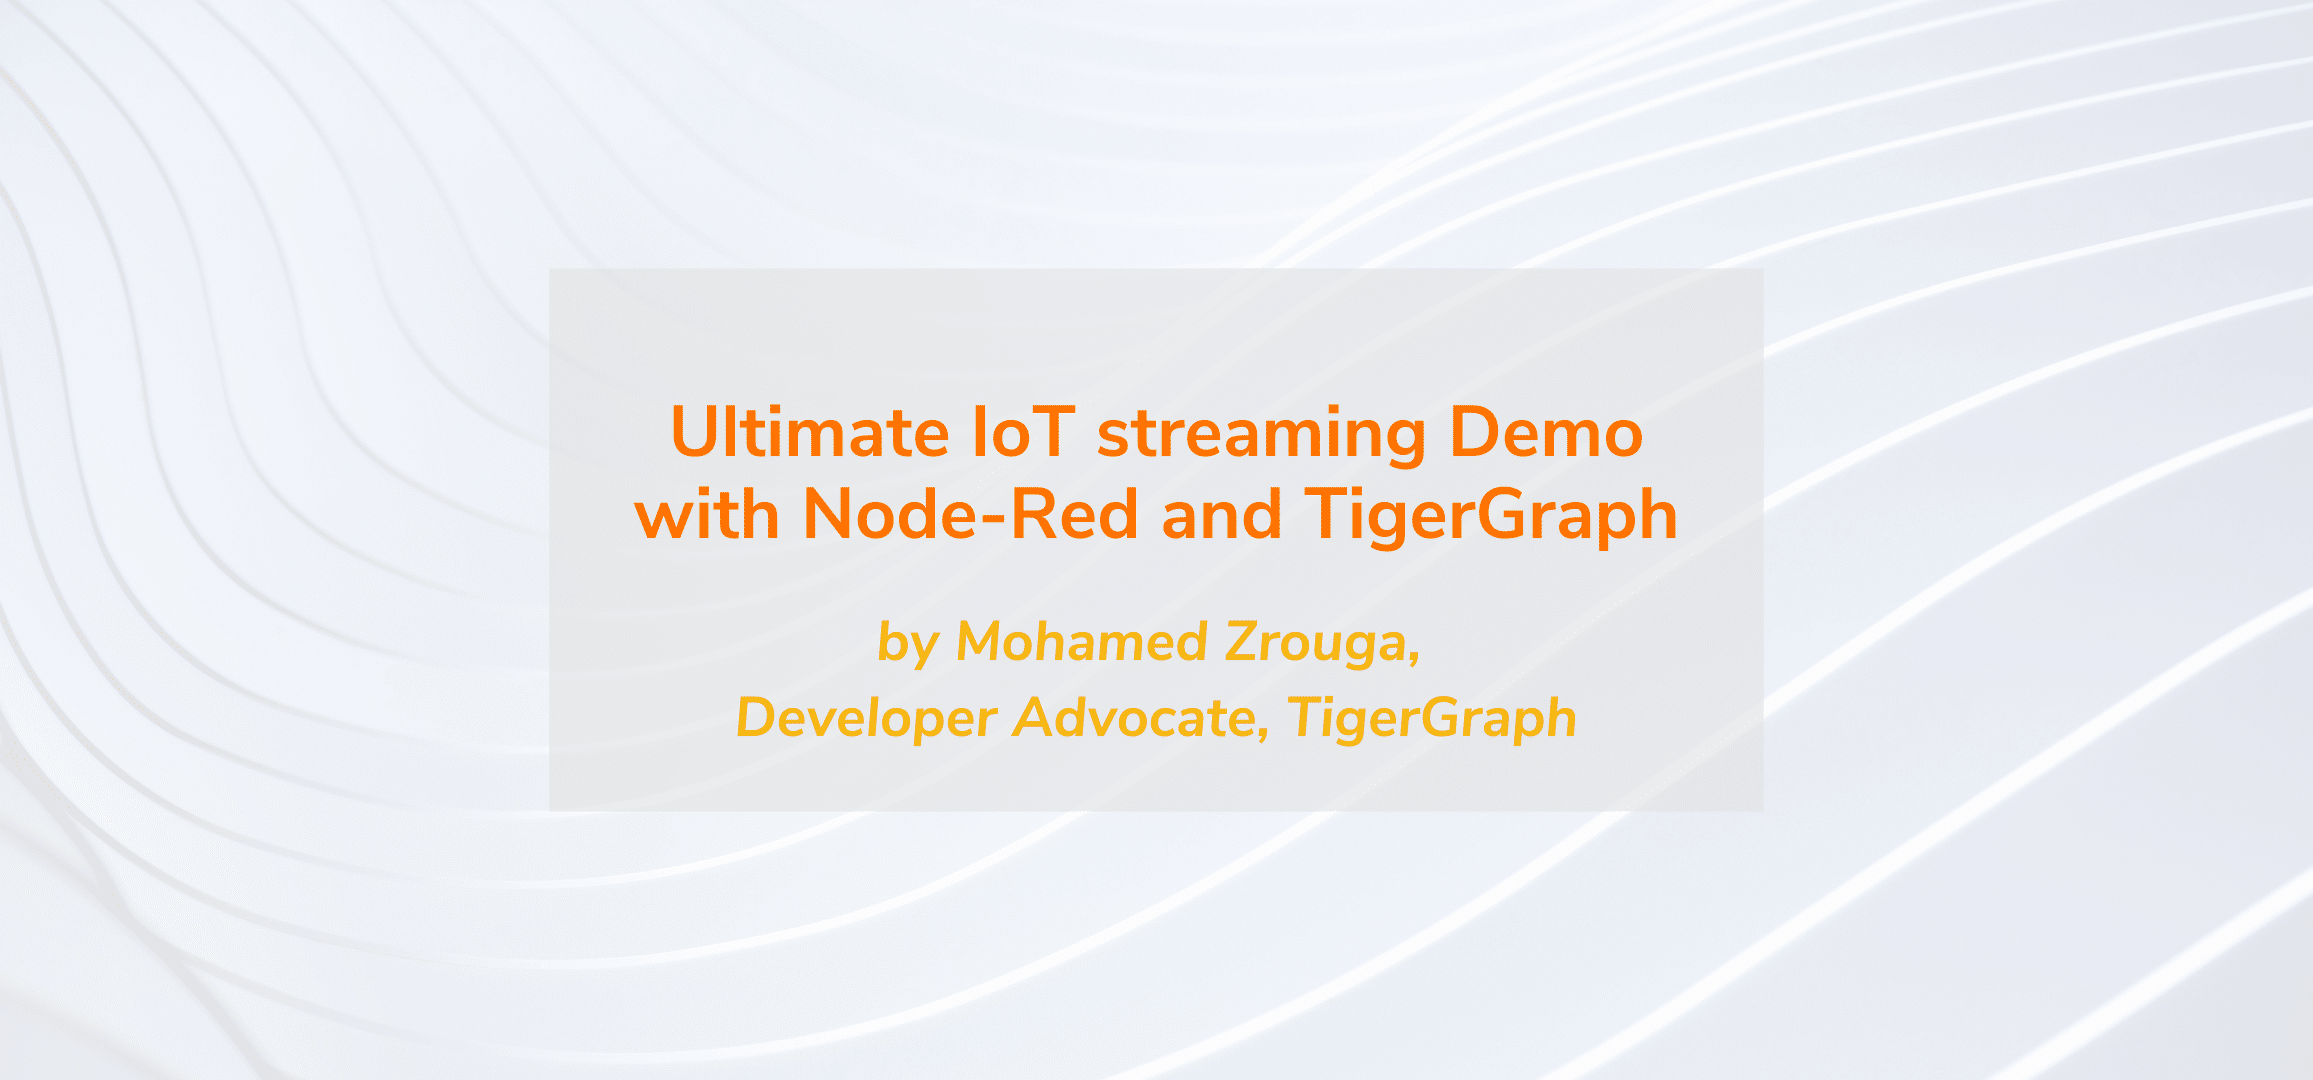 Ultimate IoT streaming Demo with Node-Red and TigerGraph